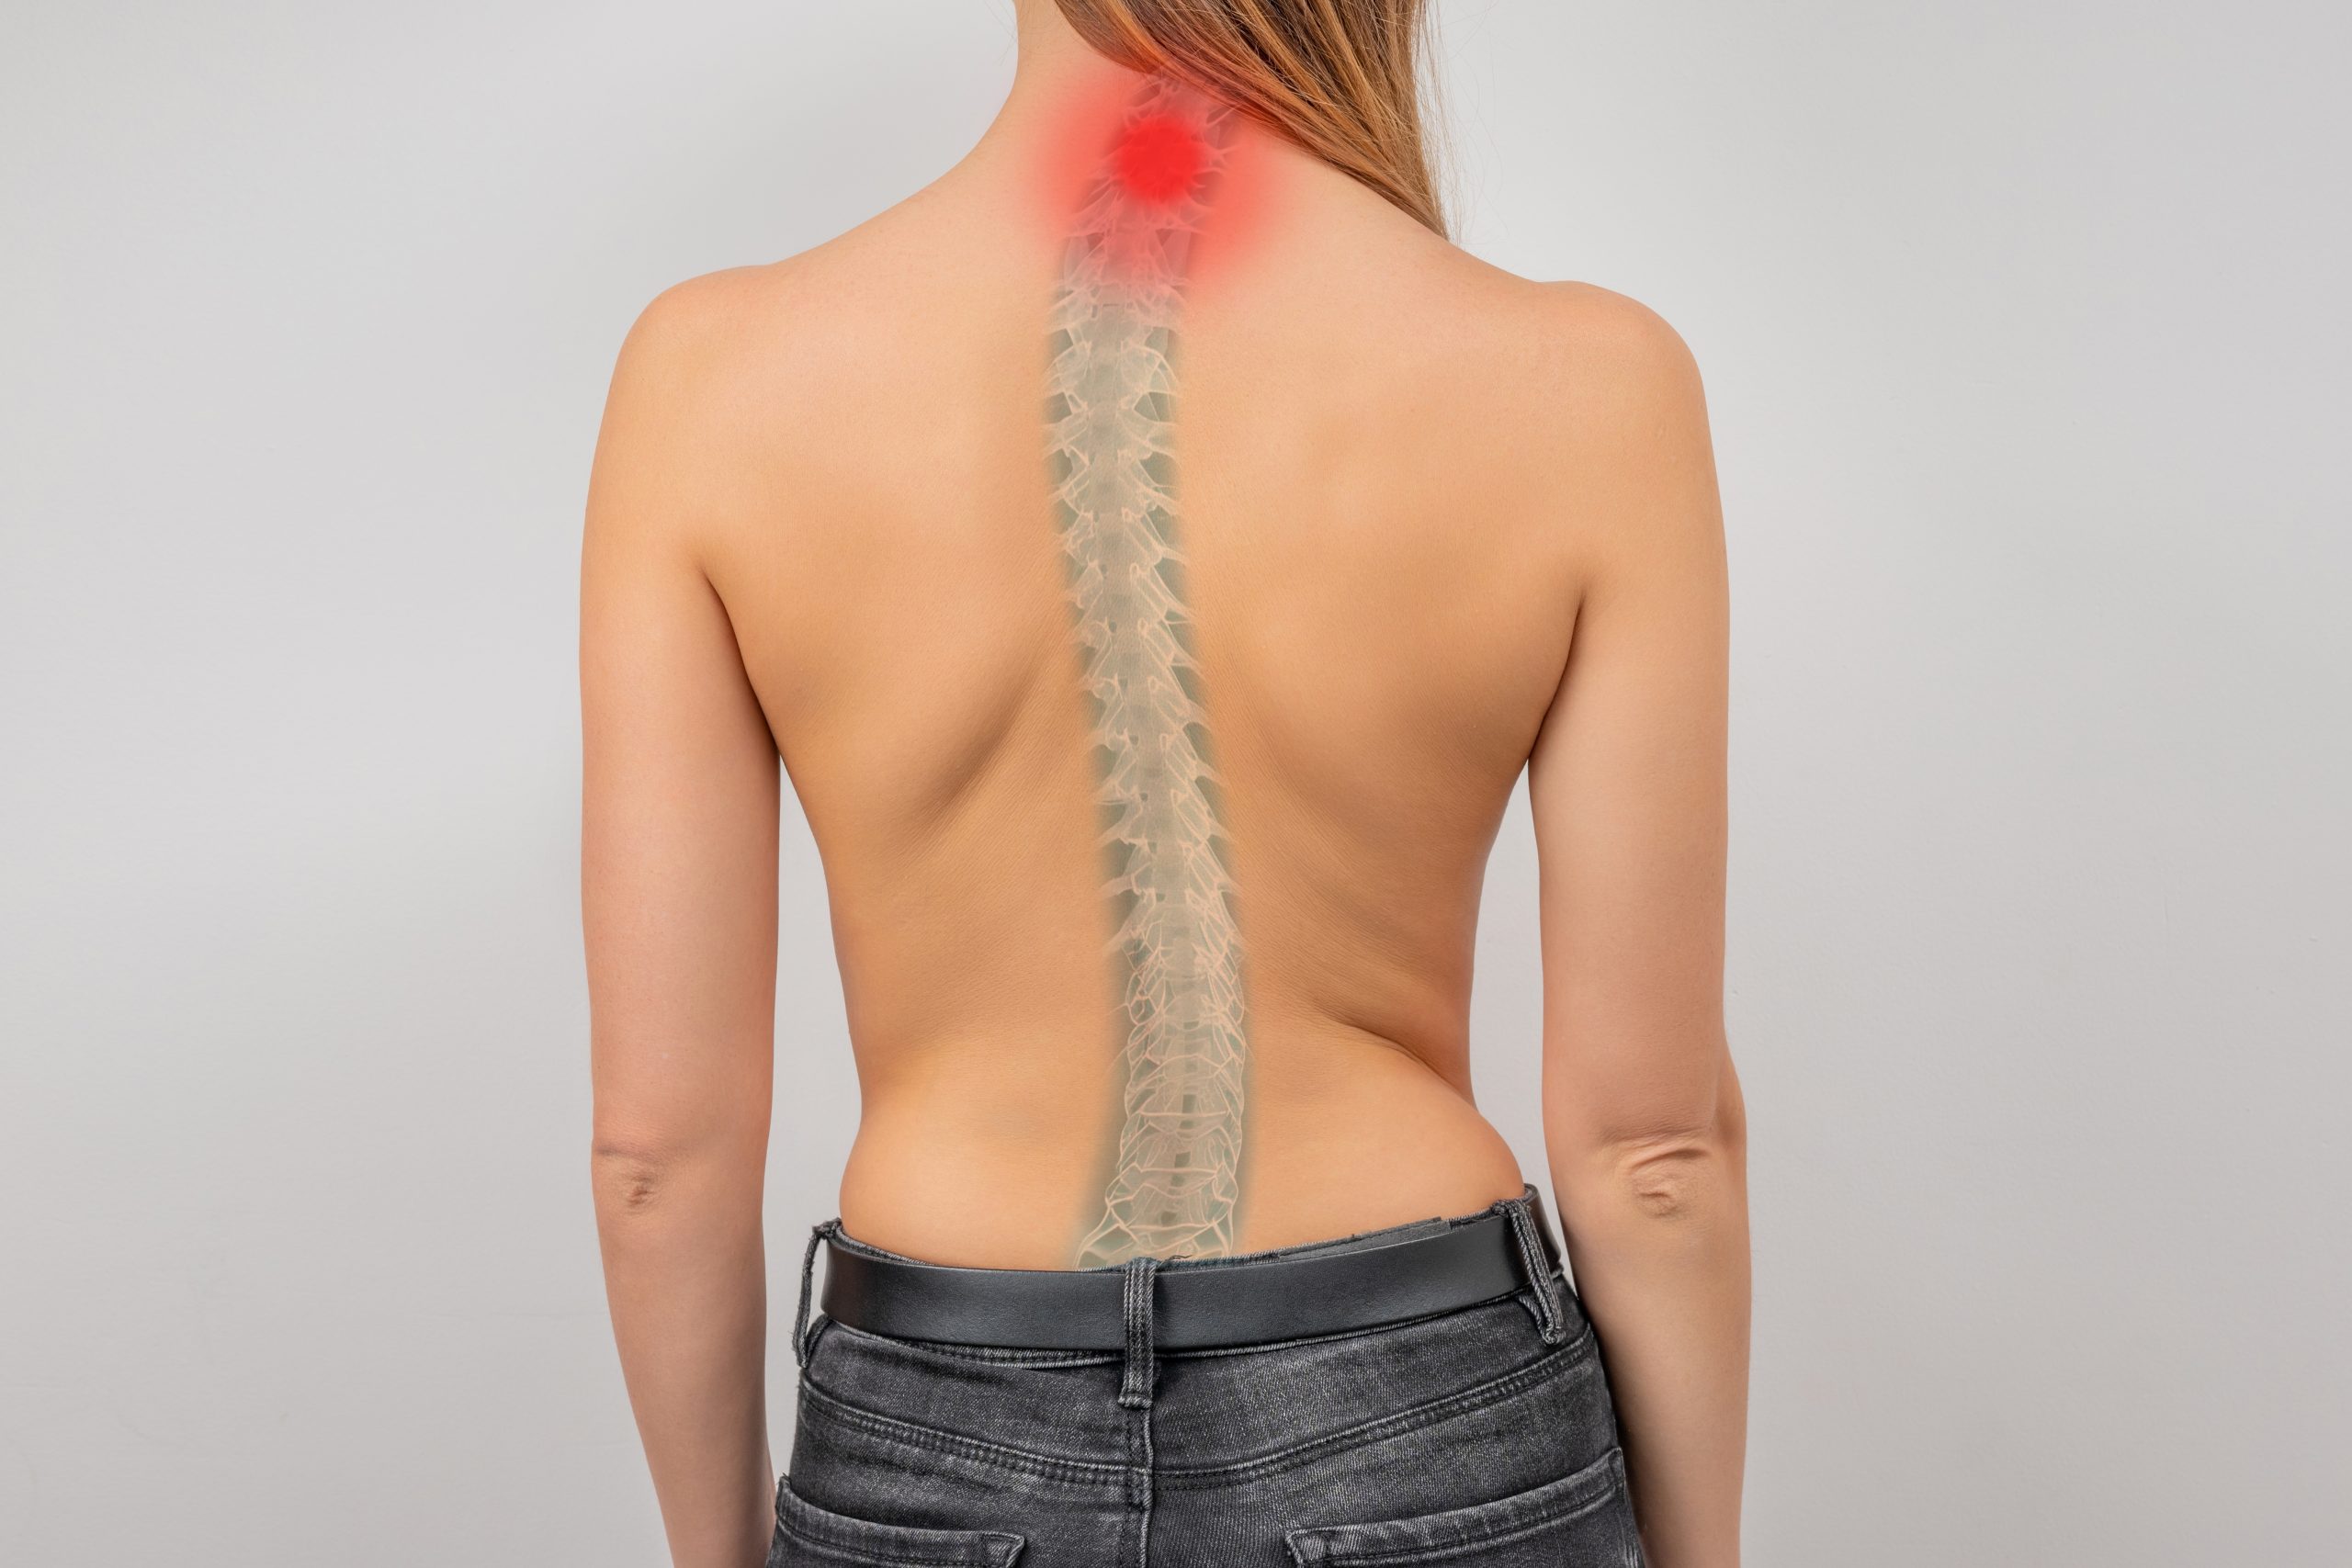 Cervical Lordosis Chiropractic Treatment Near Snohomish County, WA